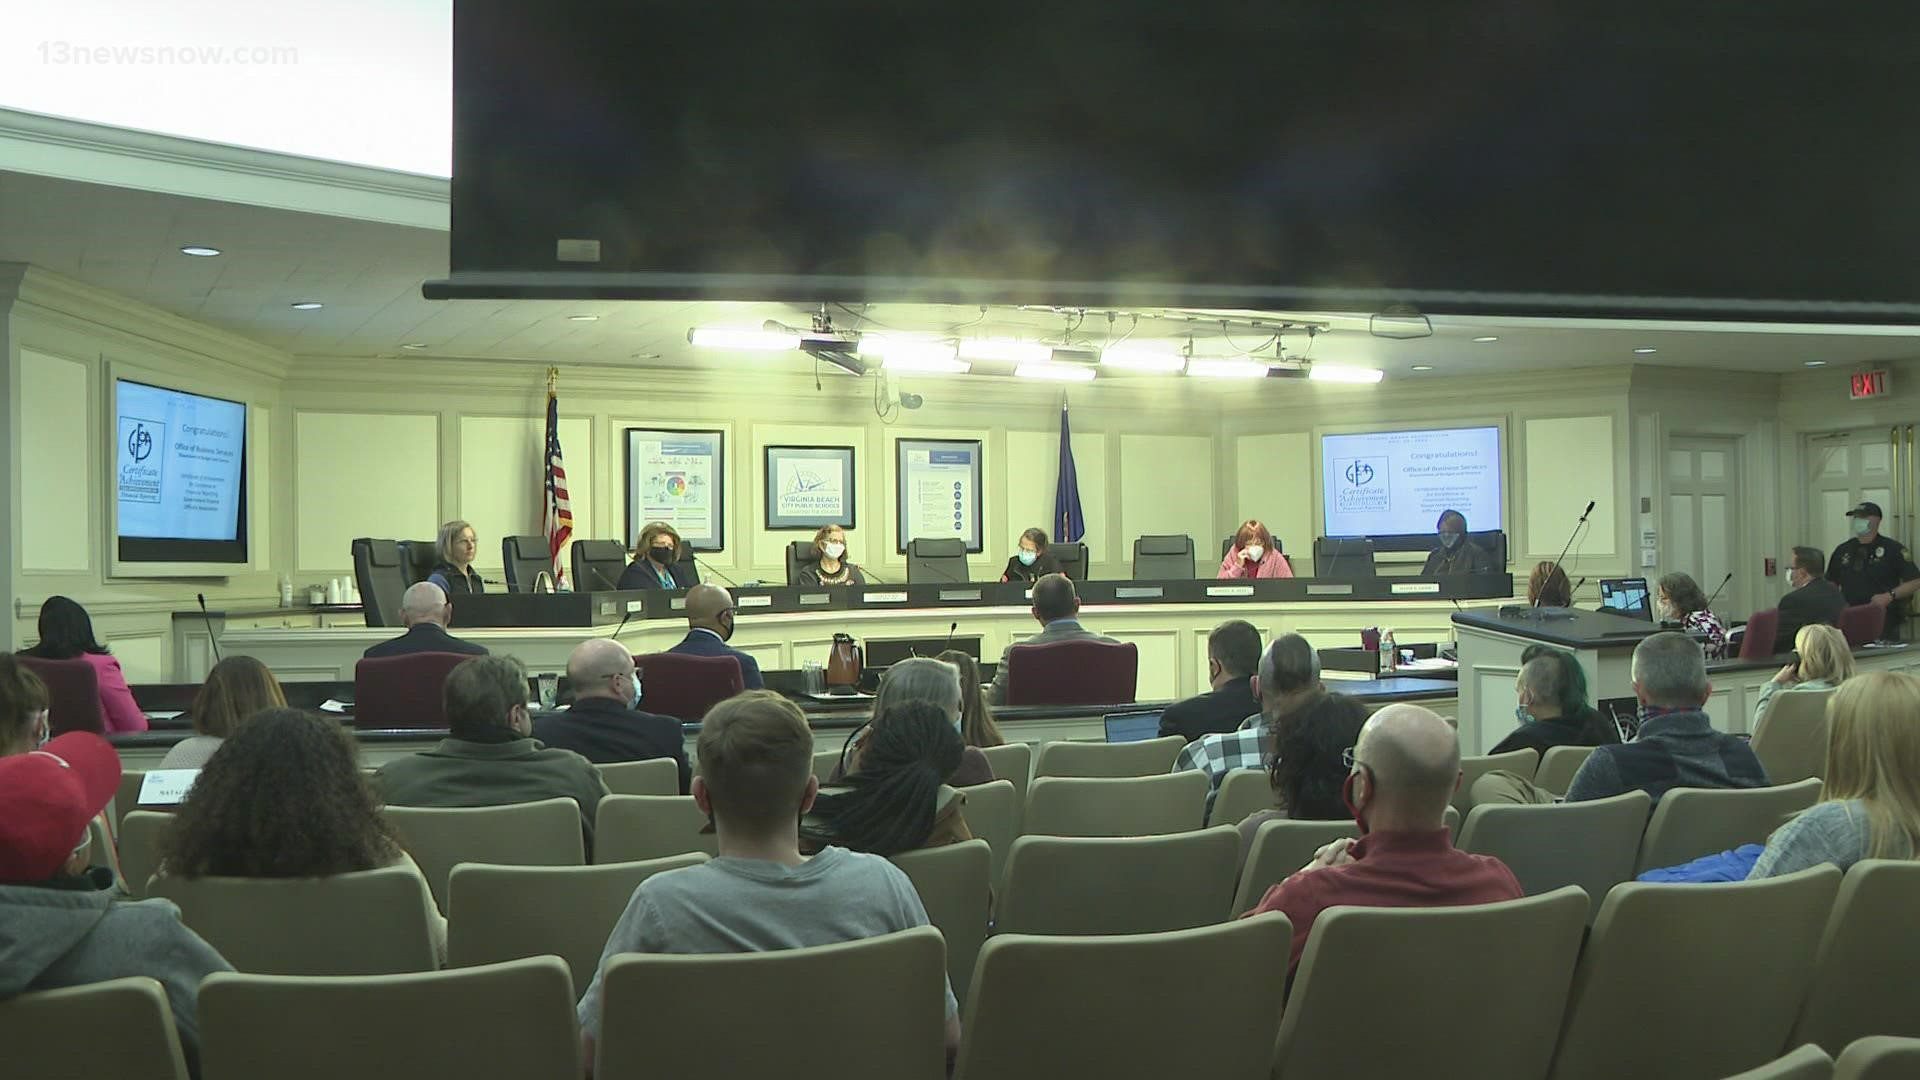 Parents spoke up at a school board meeting in Virginia Beach Tuesday night about a proposal to create more gun-free spaces.